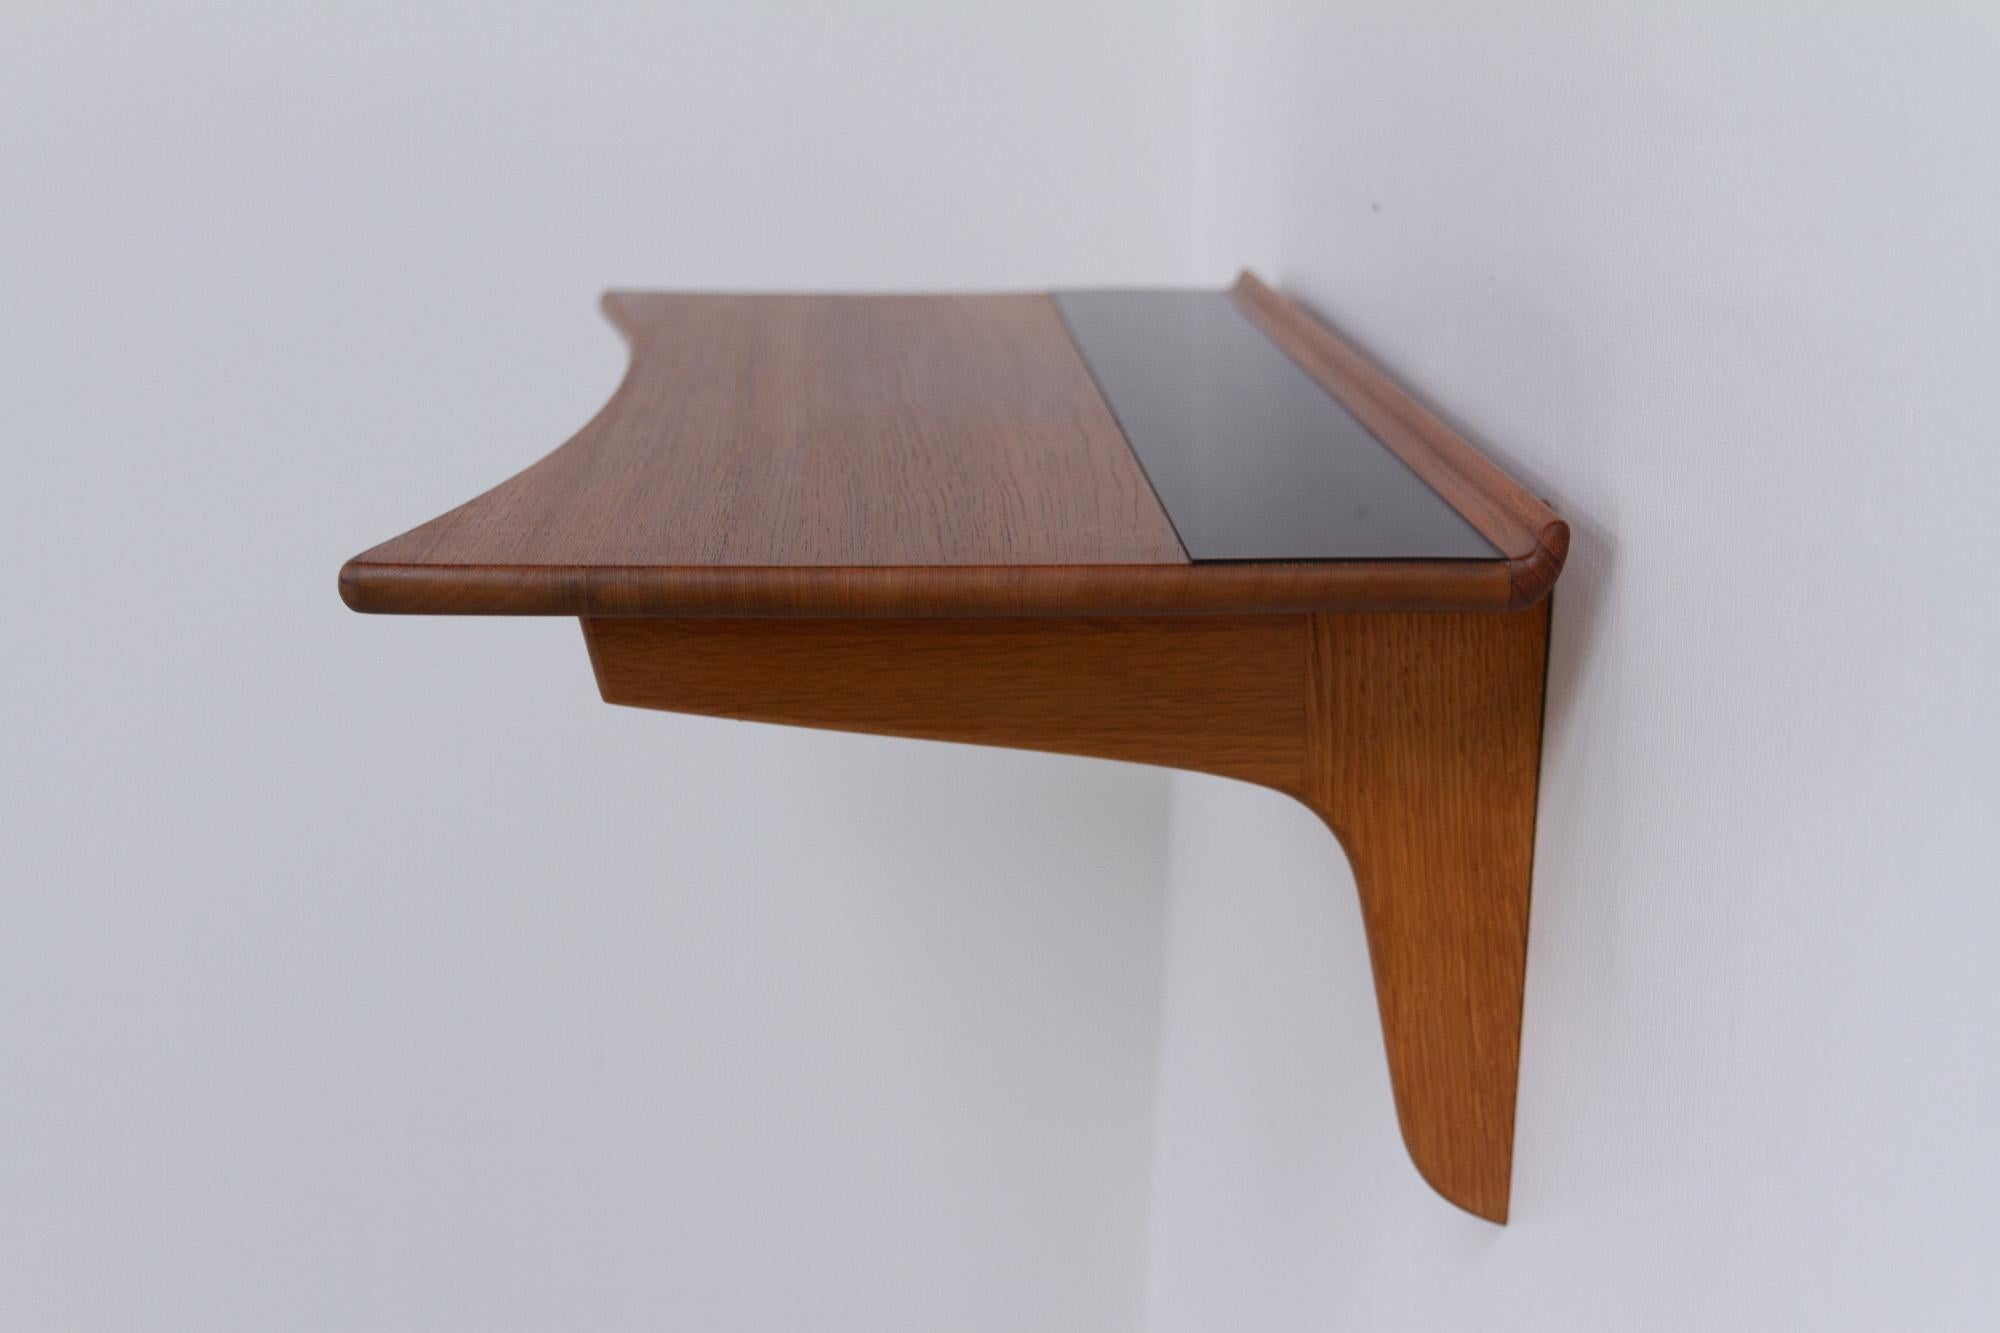 Danish Mid-Century Modern Floating Teak Console Table, 1950s.
Stylish Scandinavian Modern floating wall shelf with two drawers. Inward curved top with inlaid Formica strip. Back with raised edge trim. Supported on two solid oak brackets. Underneath